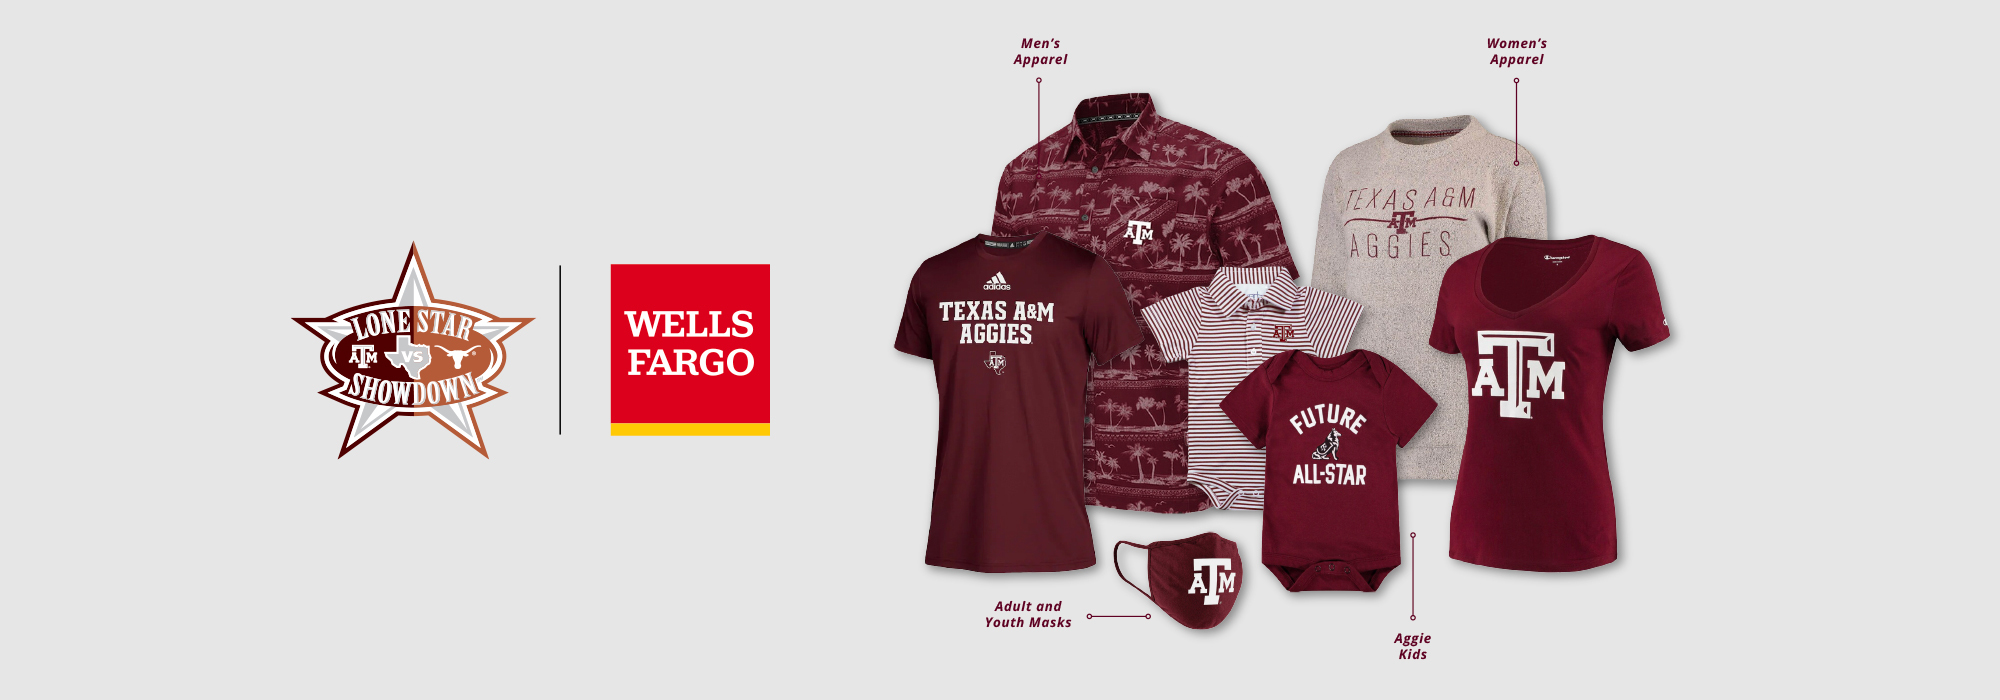 Collection of TAMU clothing with the Lone Star Showdown logo and Wells Fargo Logo